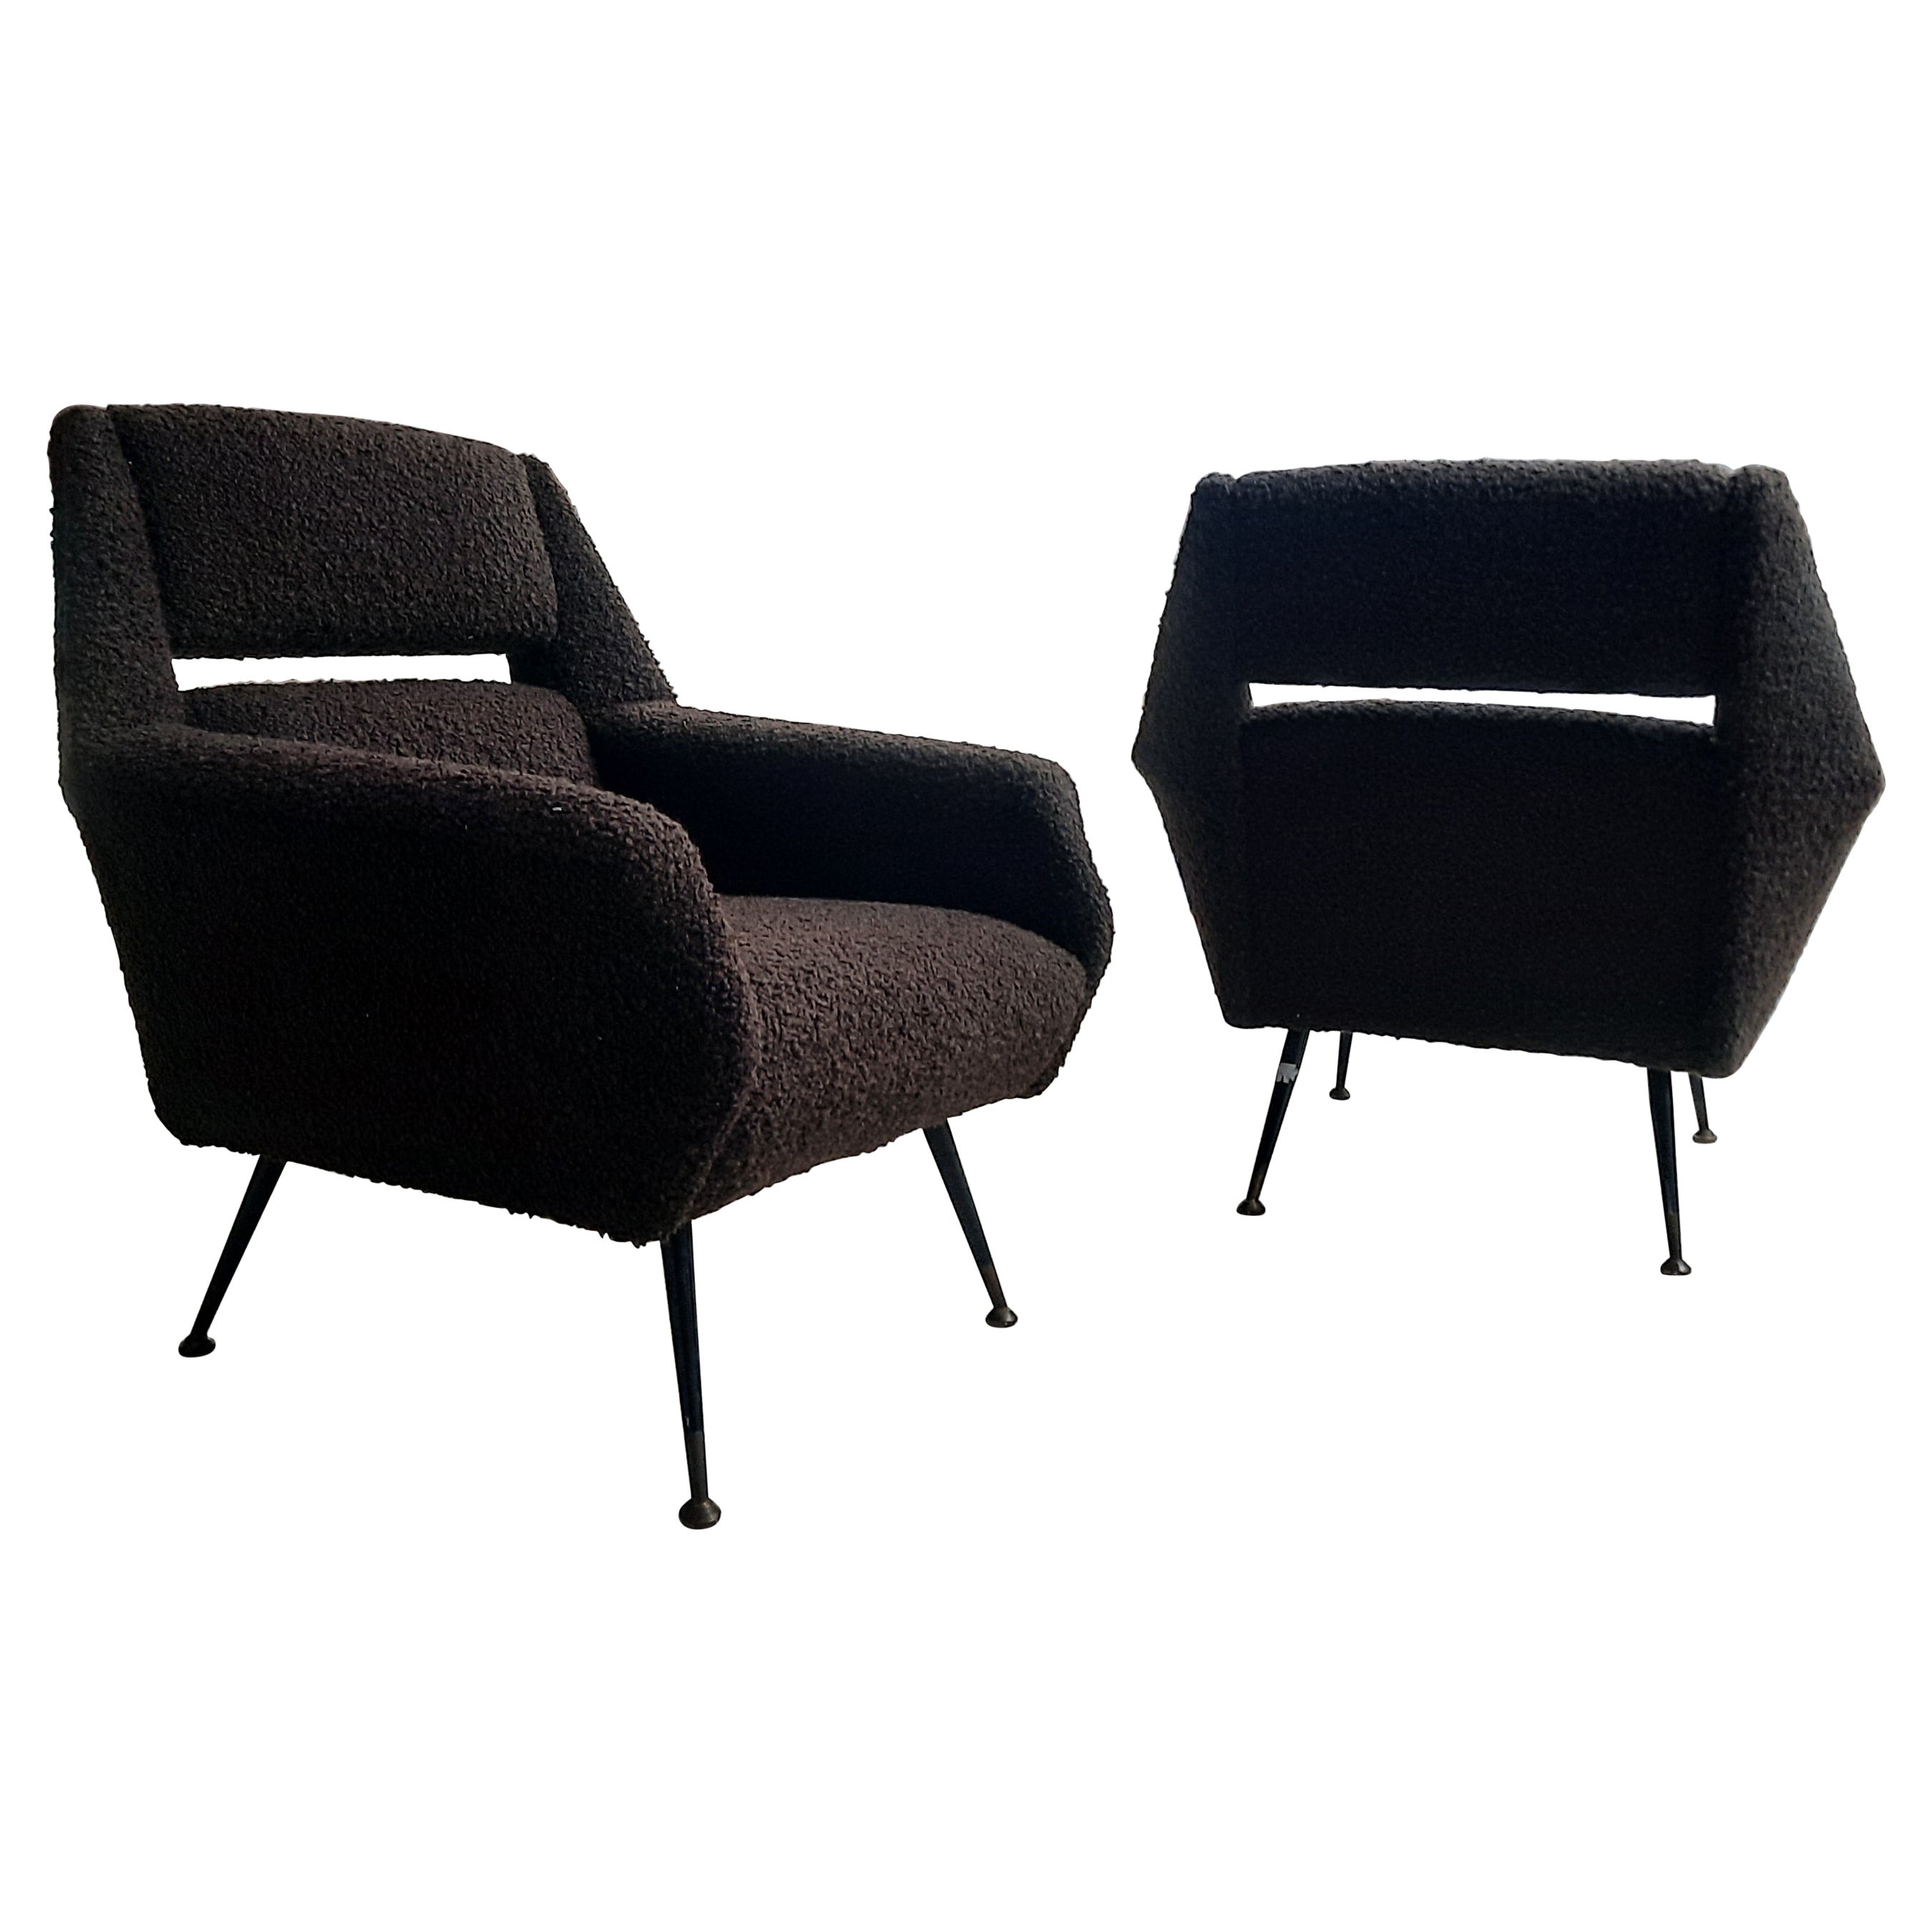 Pair of Italian Armchairs 1950, Reupholstered in Chocolate Bouclé